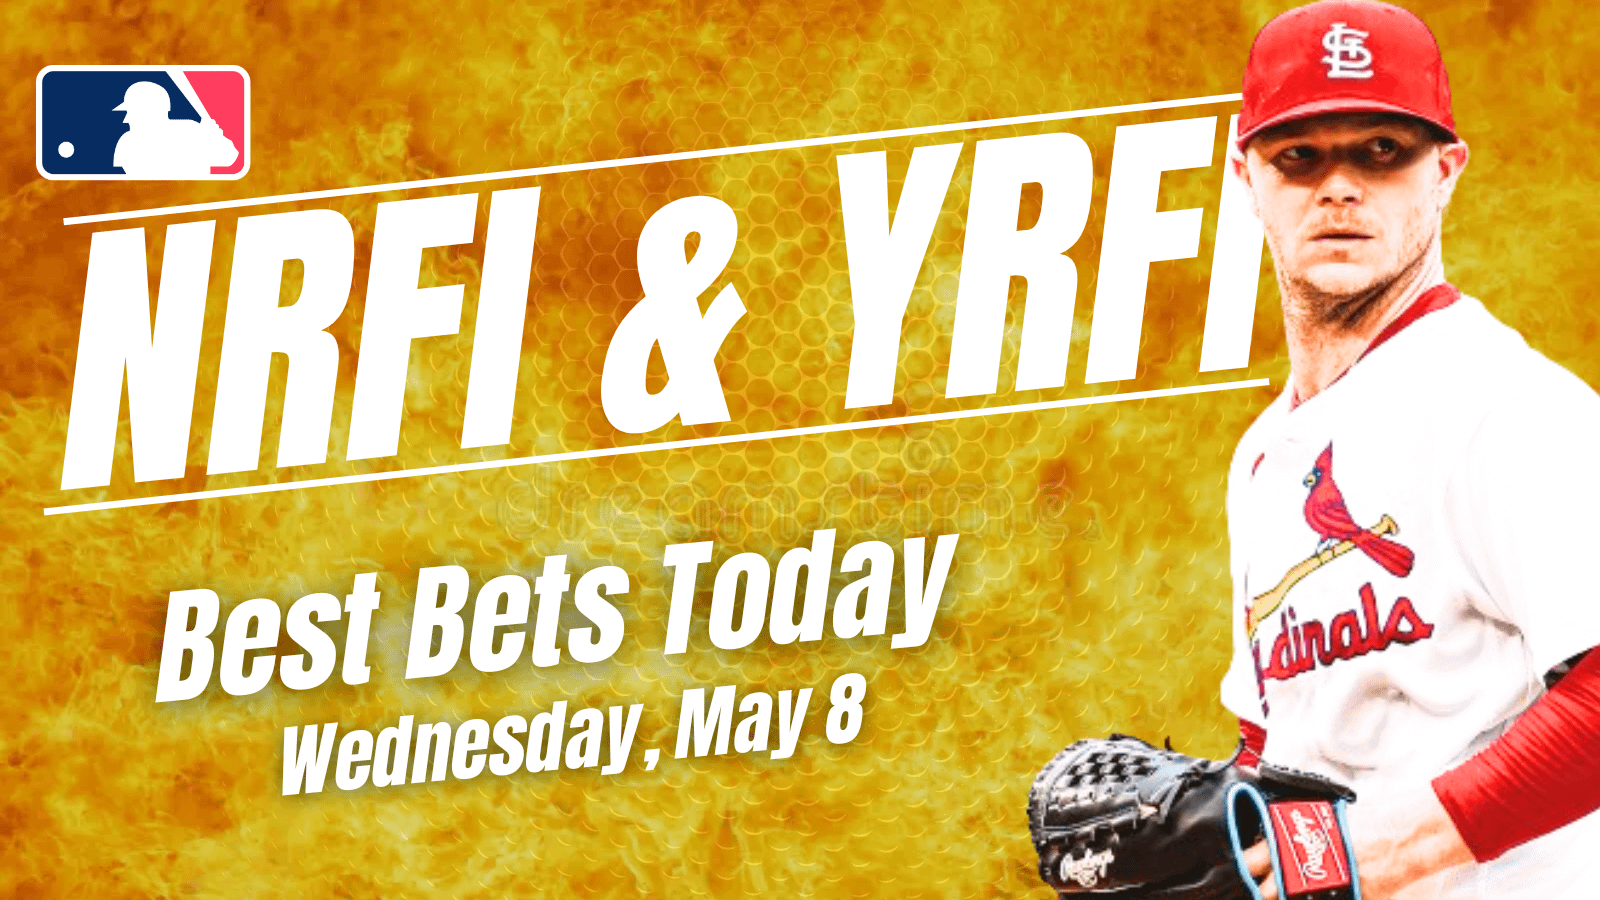 Looking for the top NRFI/YRFI bets today? We dive into the best first inning bets for Wednesday, May 8, including...